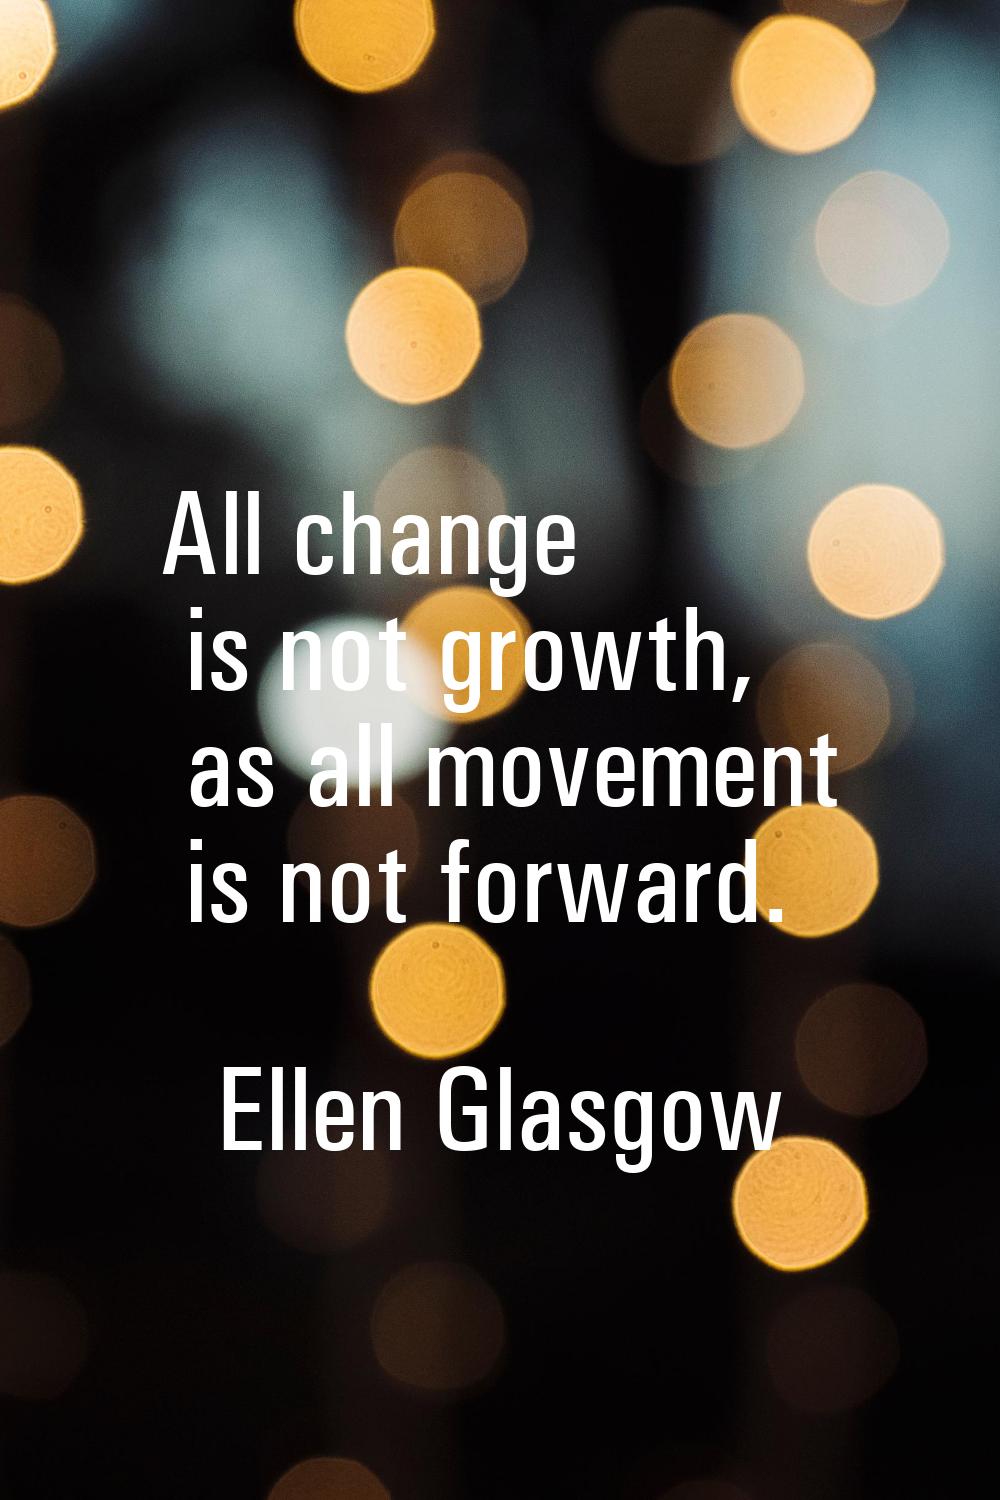 All change is not growth, as all movement is not forward.